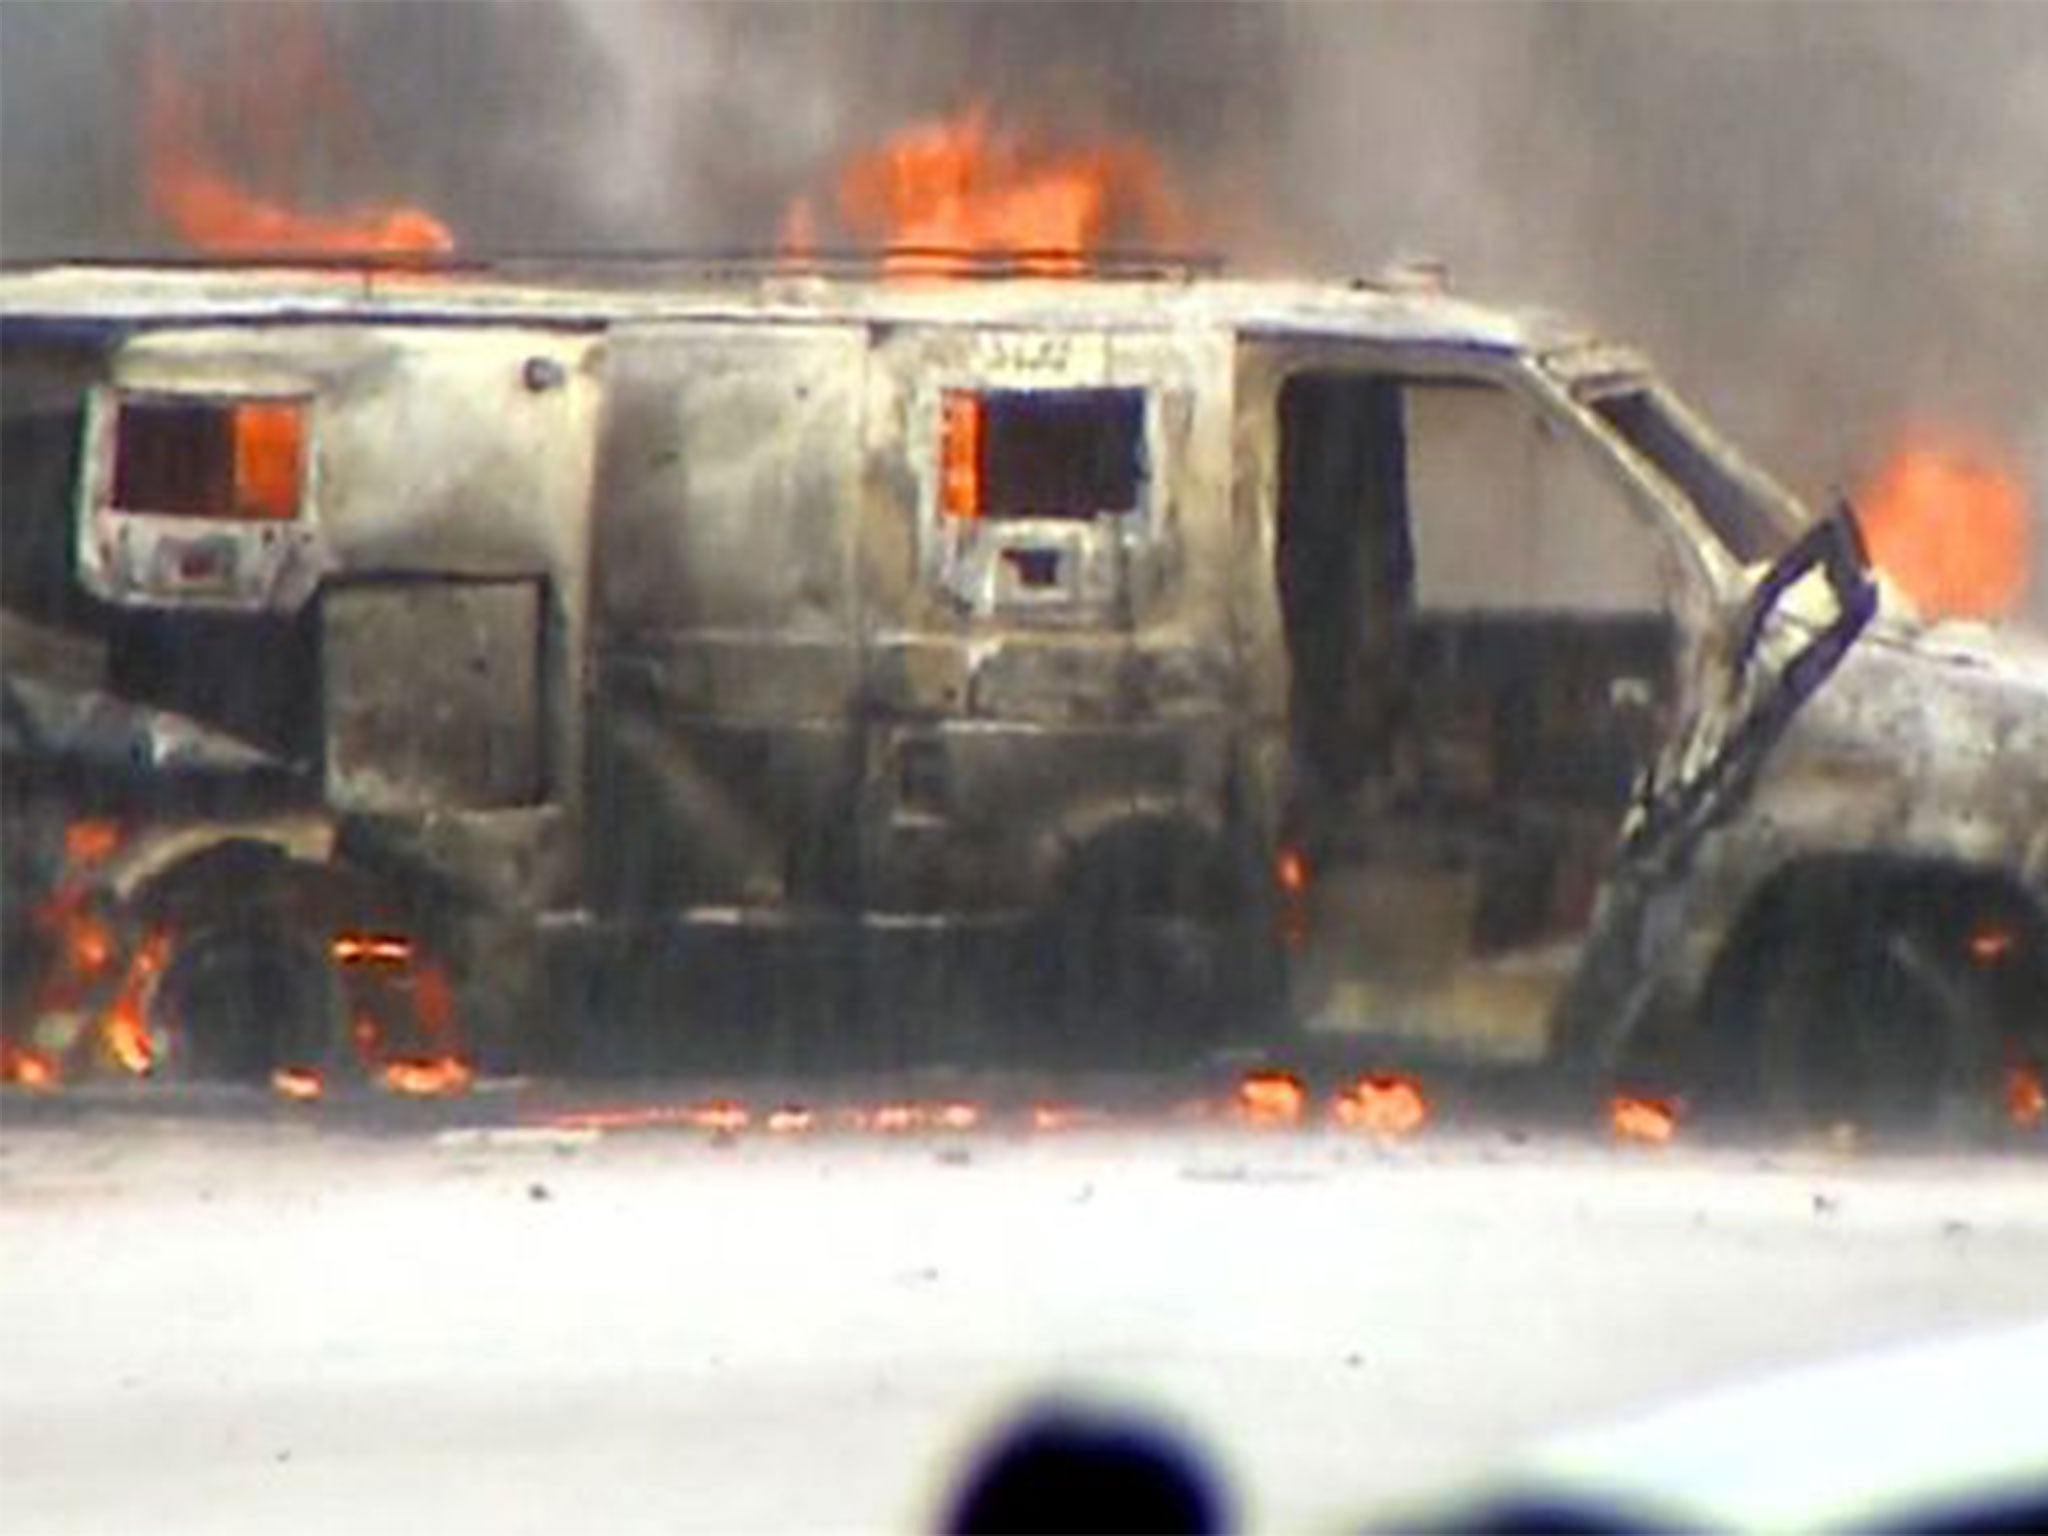 The armoured van was set ablaze after the Dallas stand-off